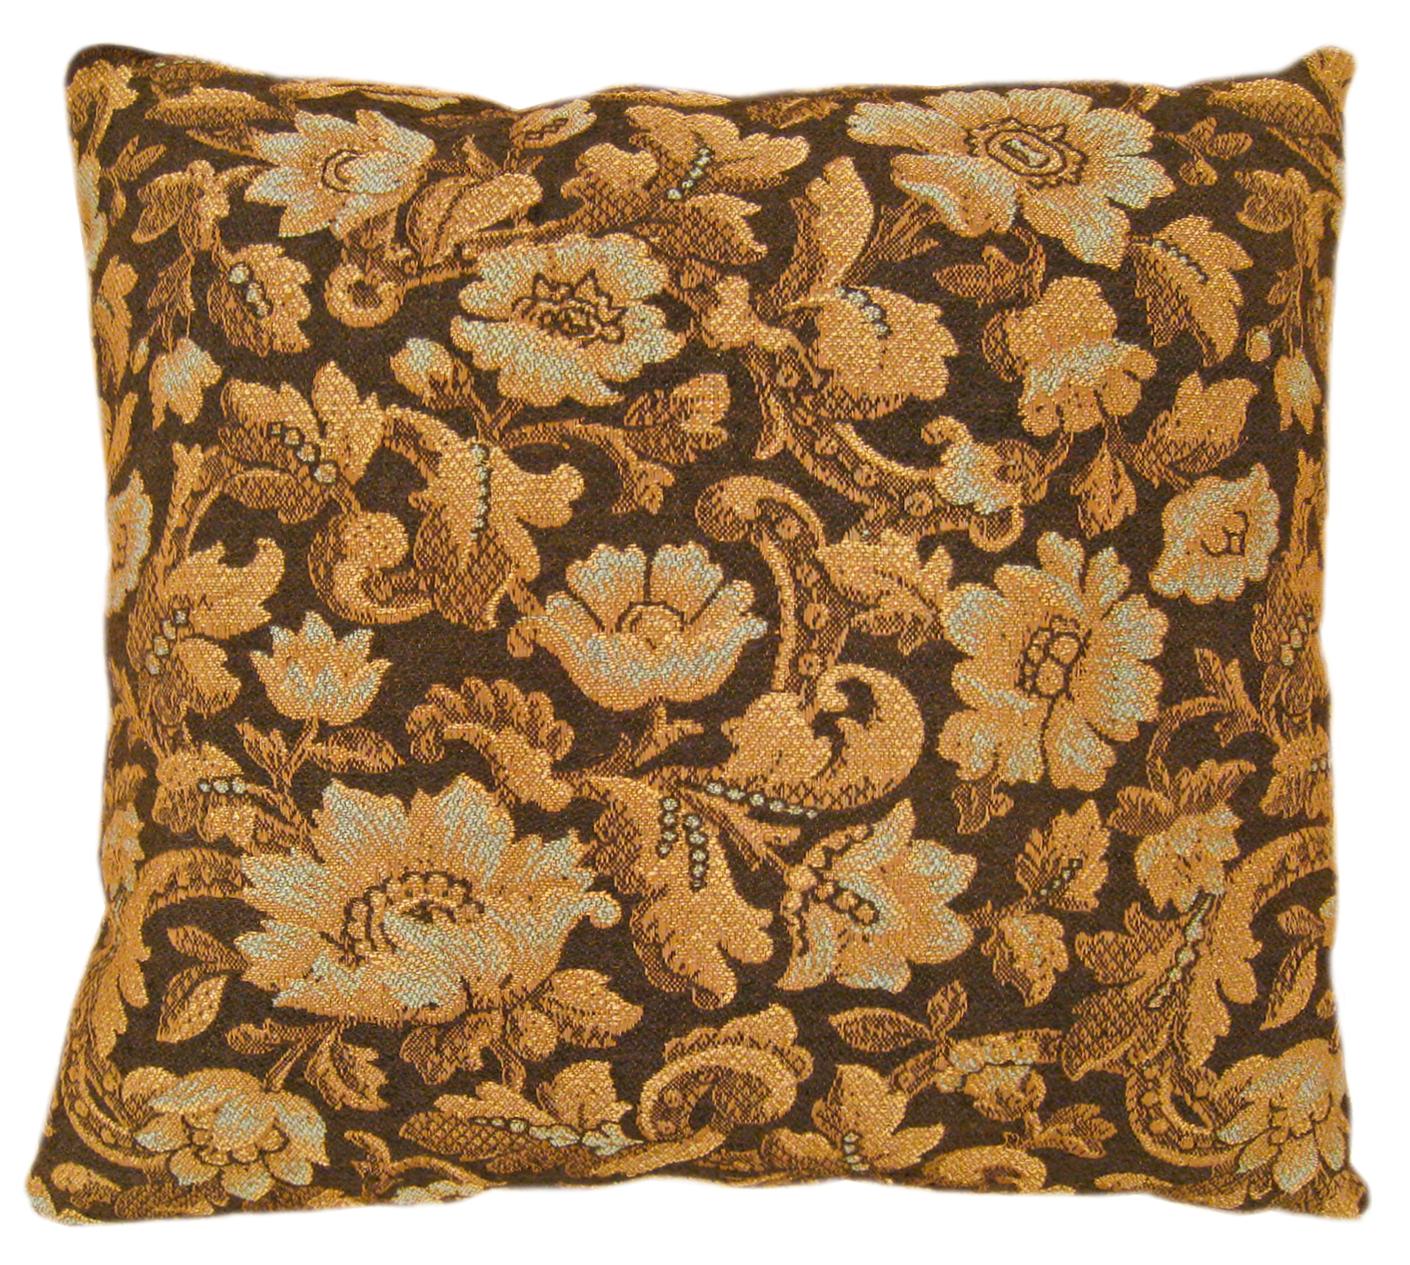 Pair of Decorative Antique Jacquard Tapestry Pillows with Floral Elements For Sale 2